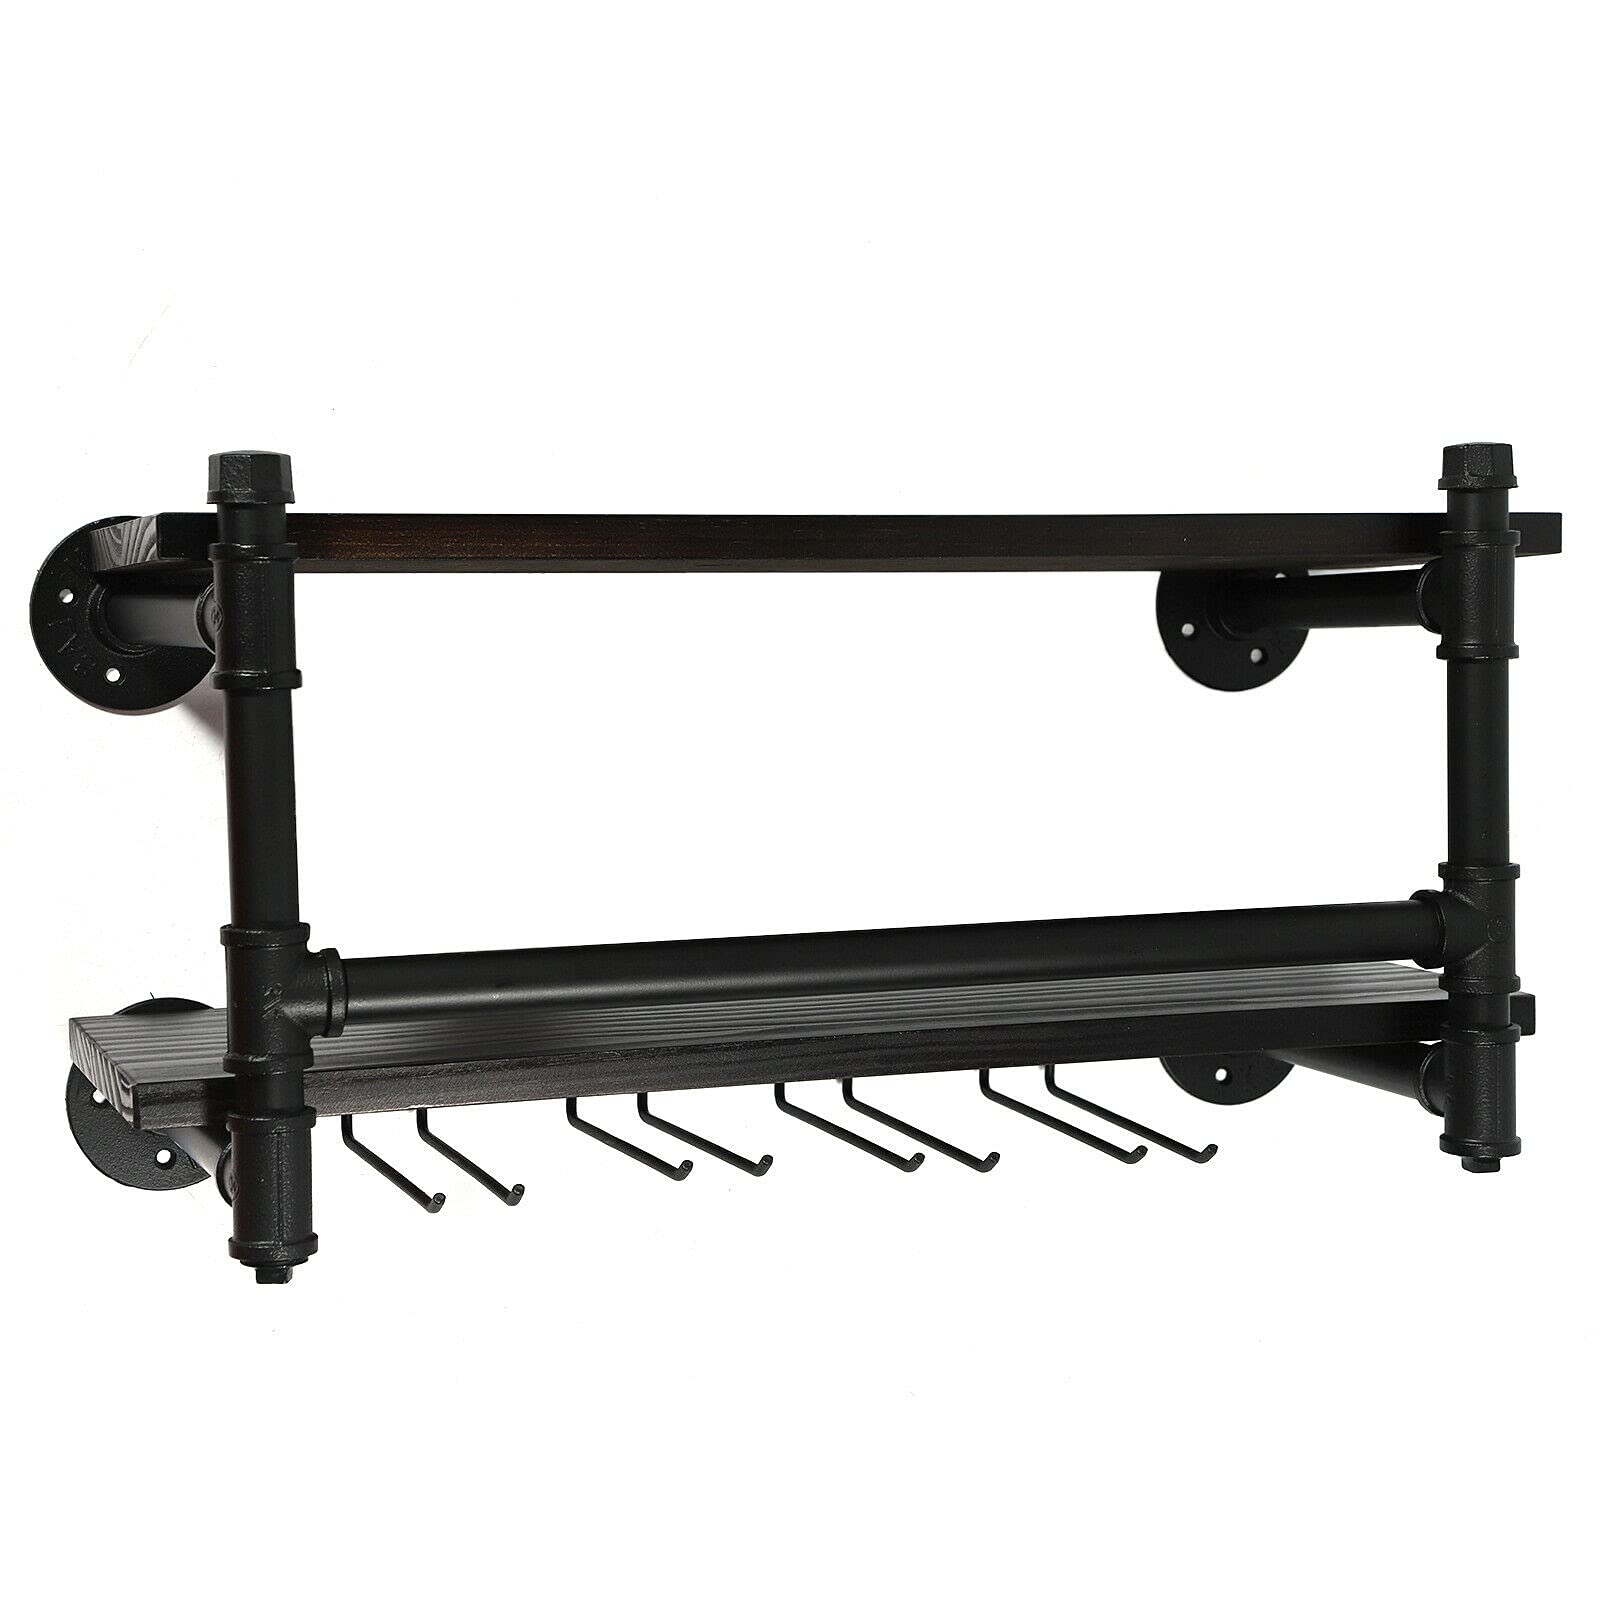 2 Tire Industrial Wall Mounted Wine Rack